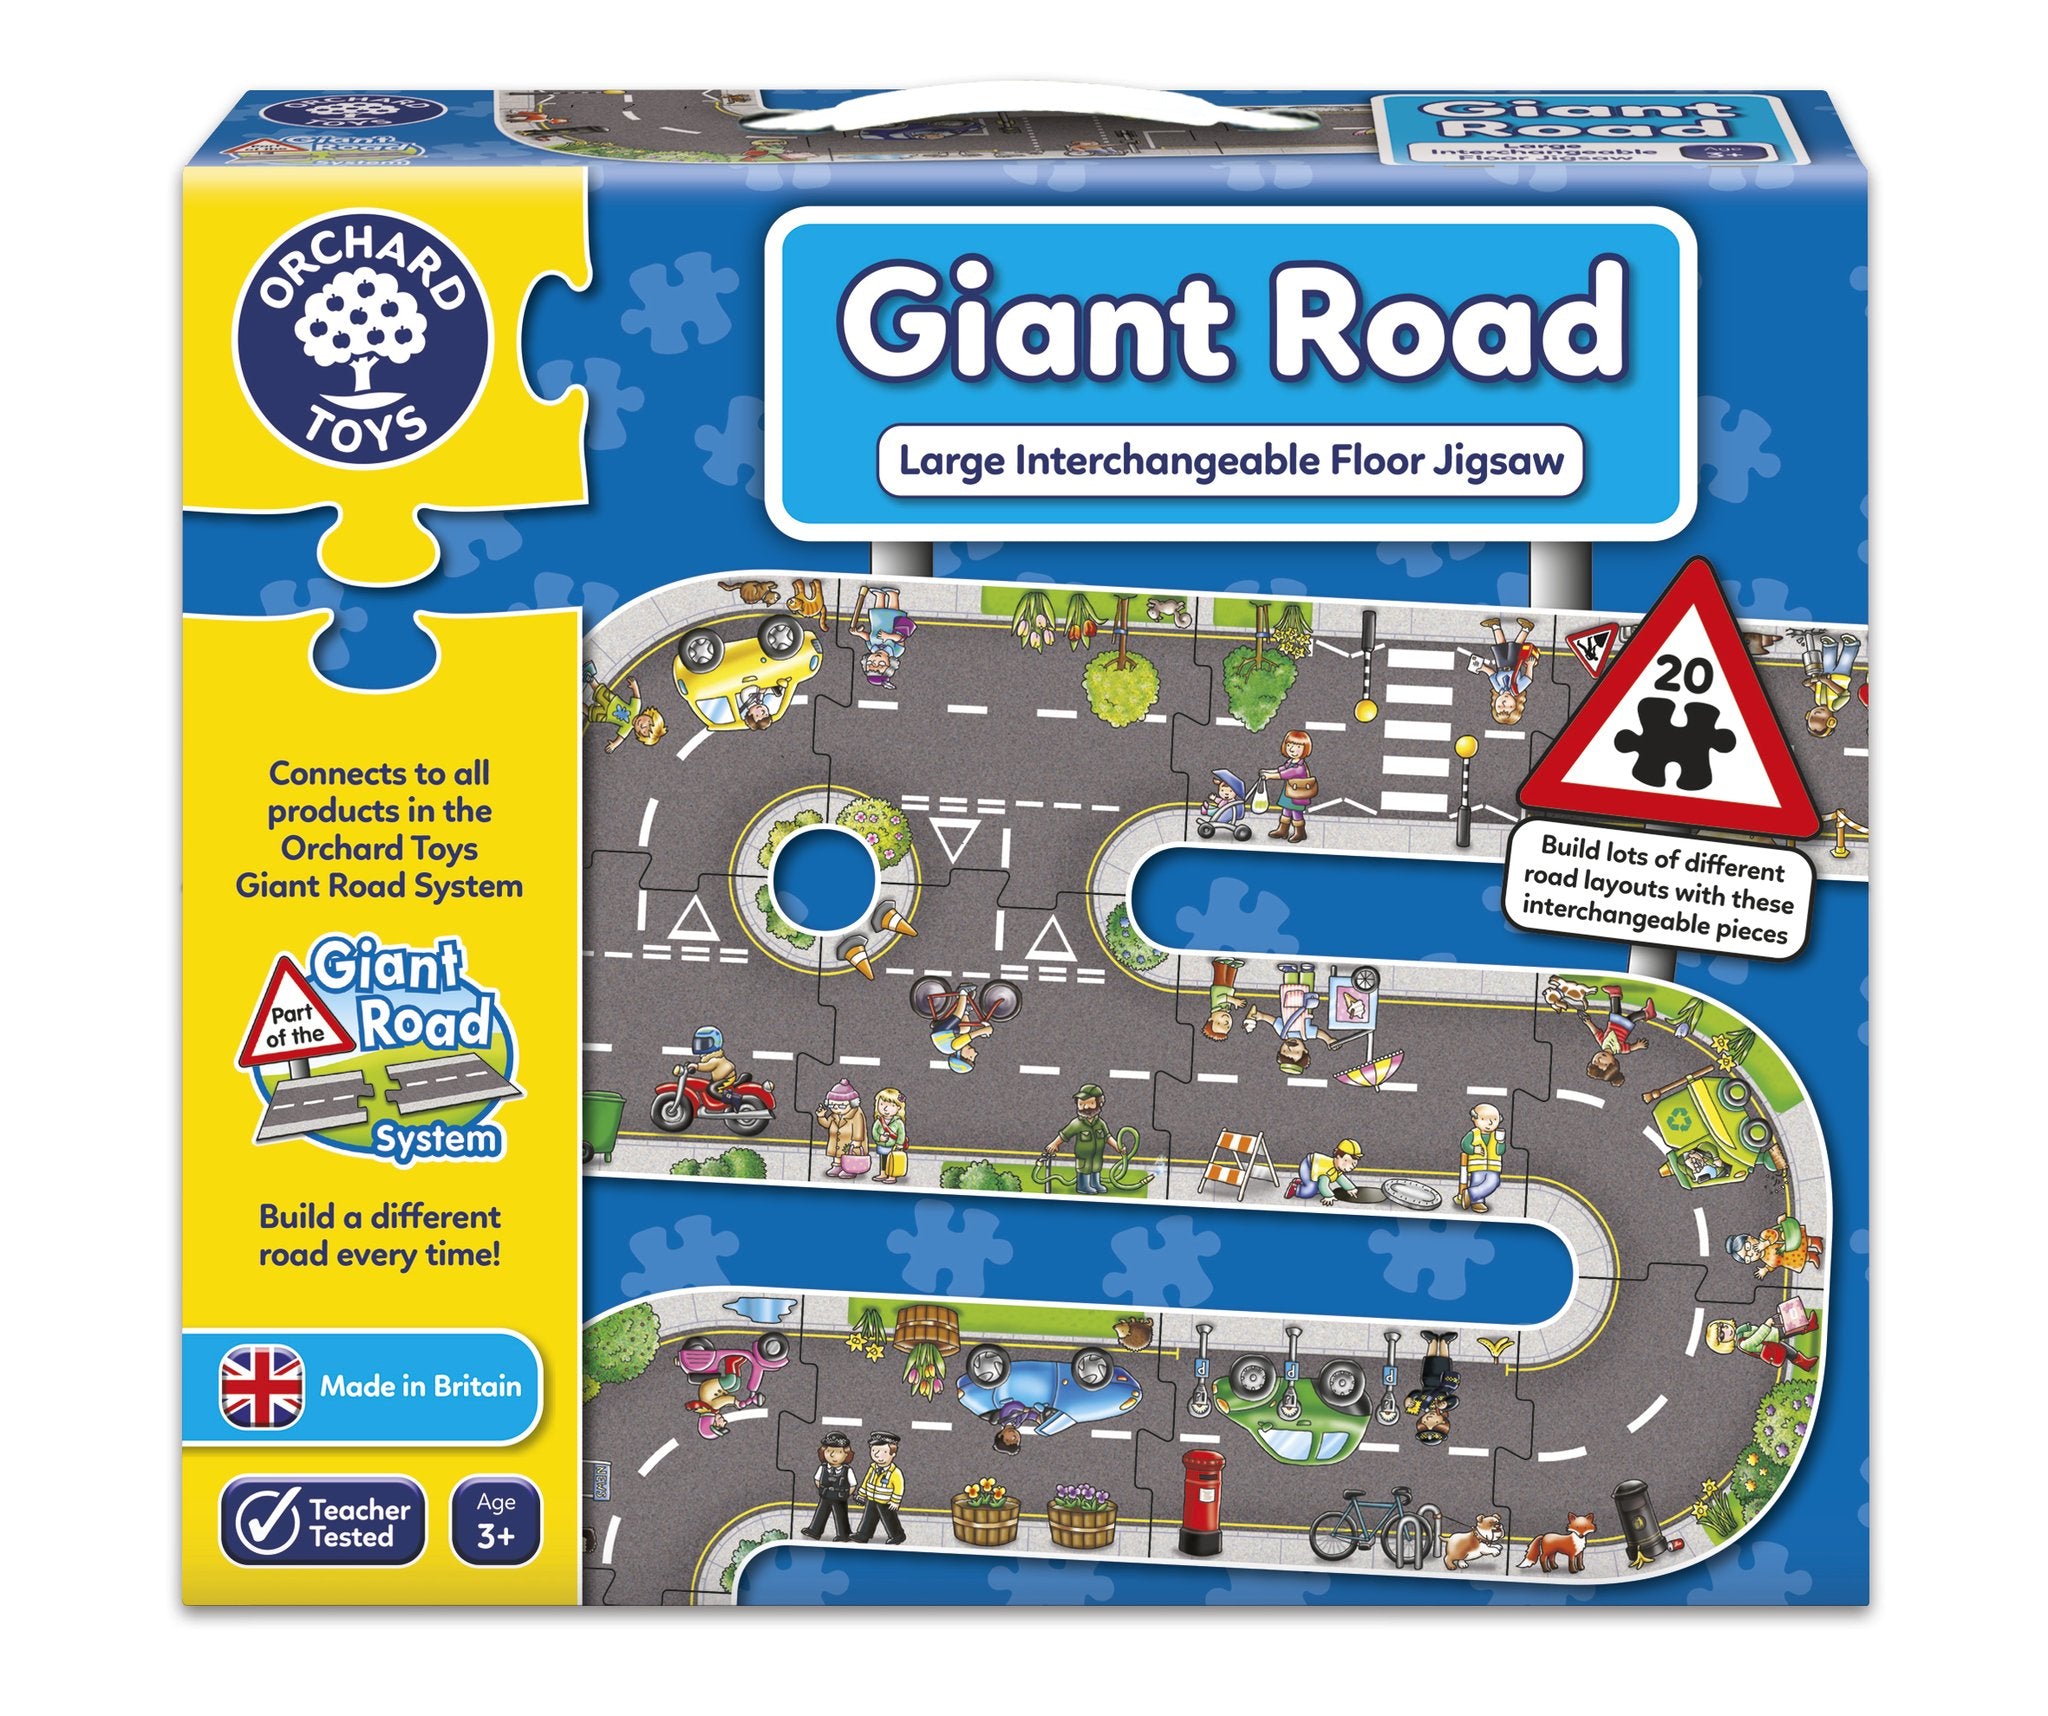 Giant Road Floor Jigsaw 20pc - Orchard